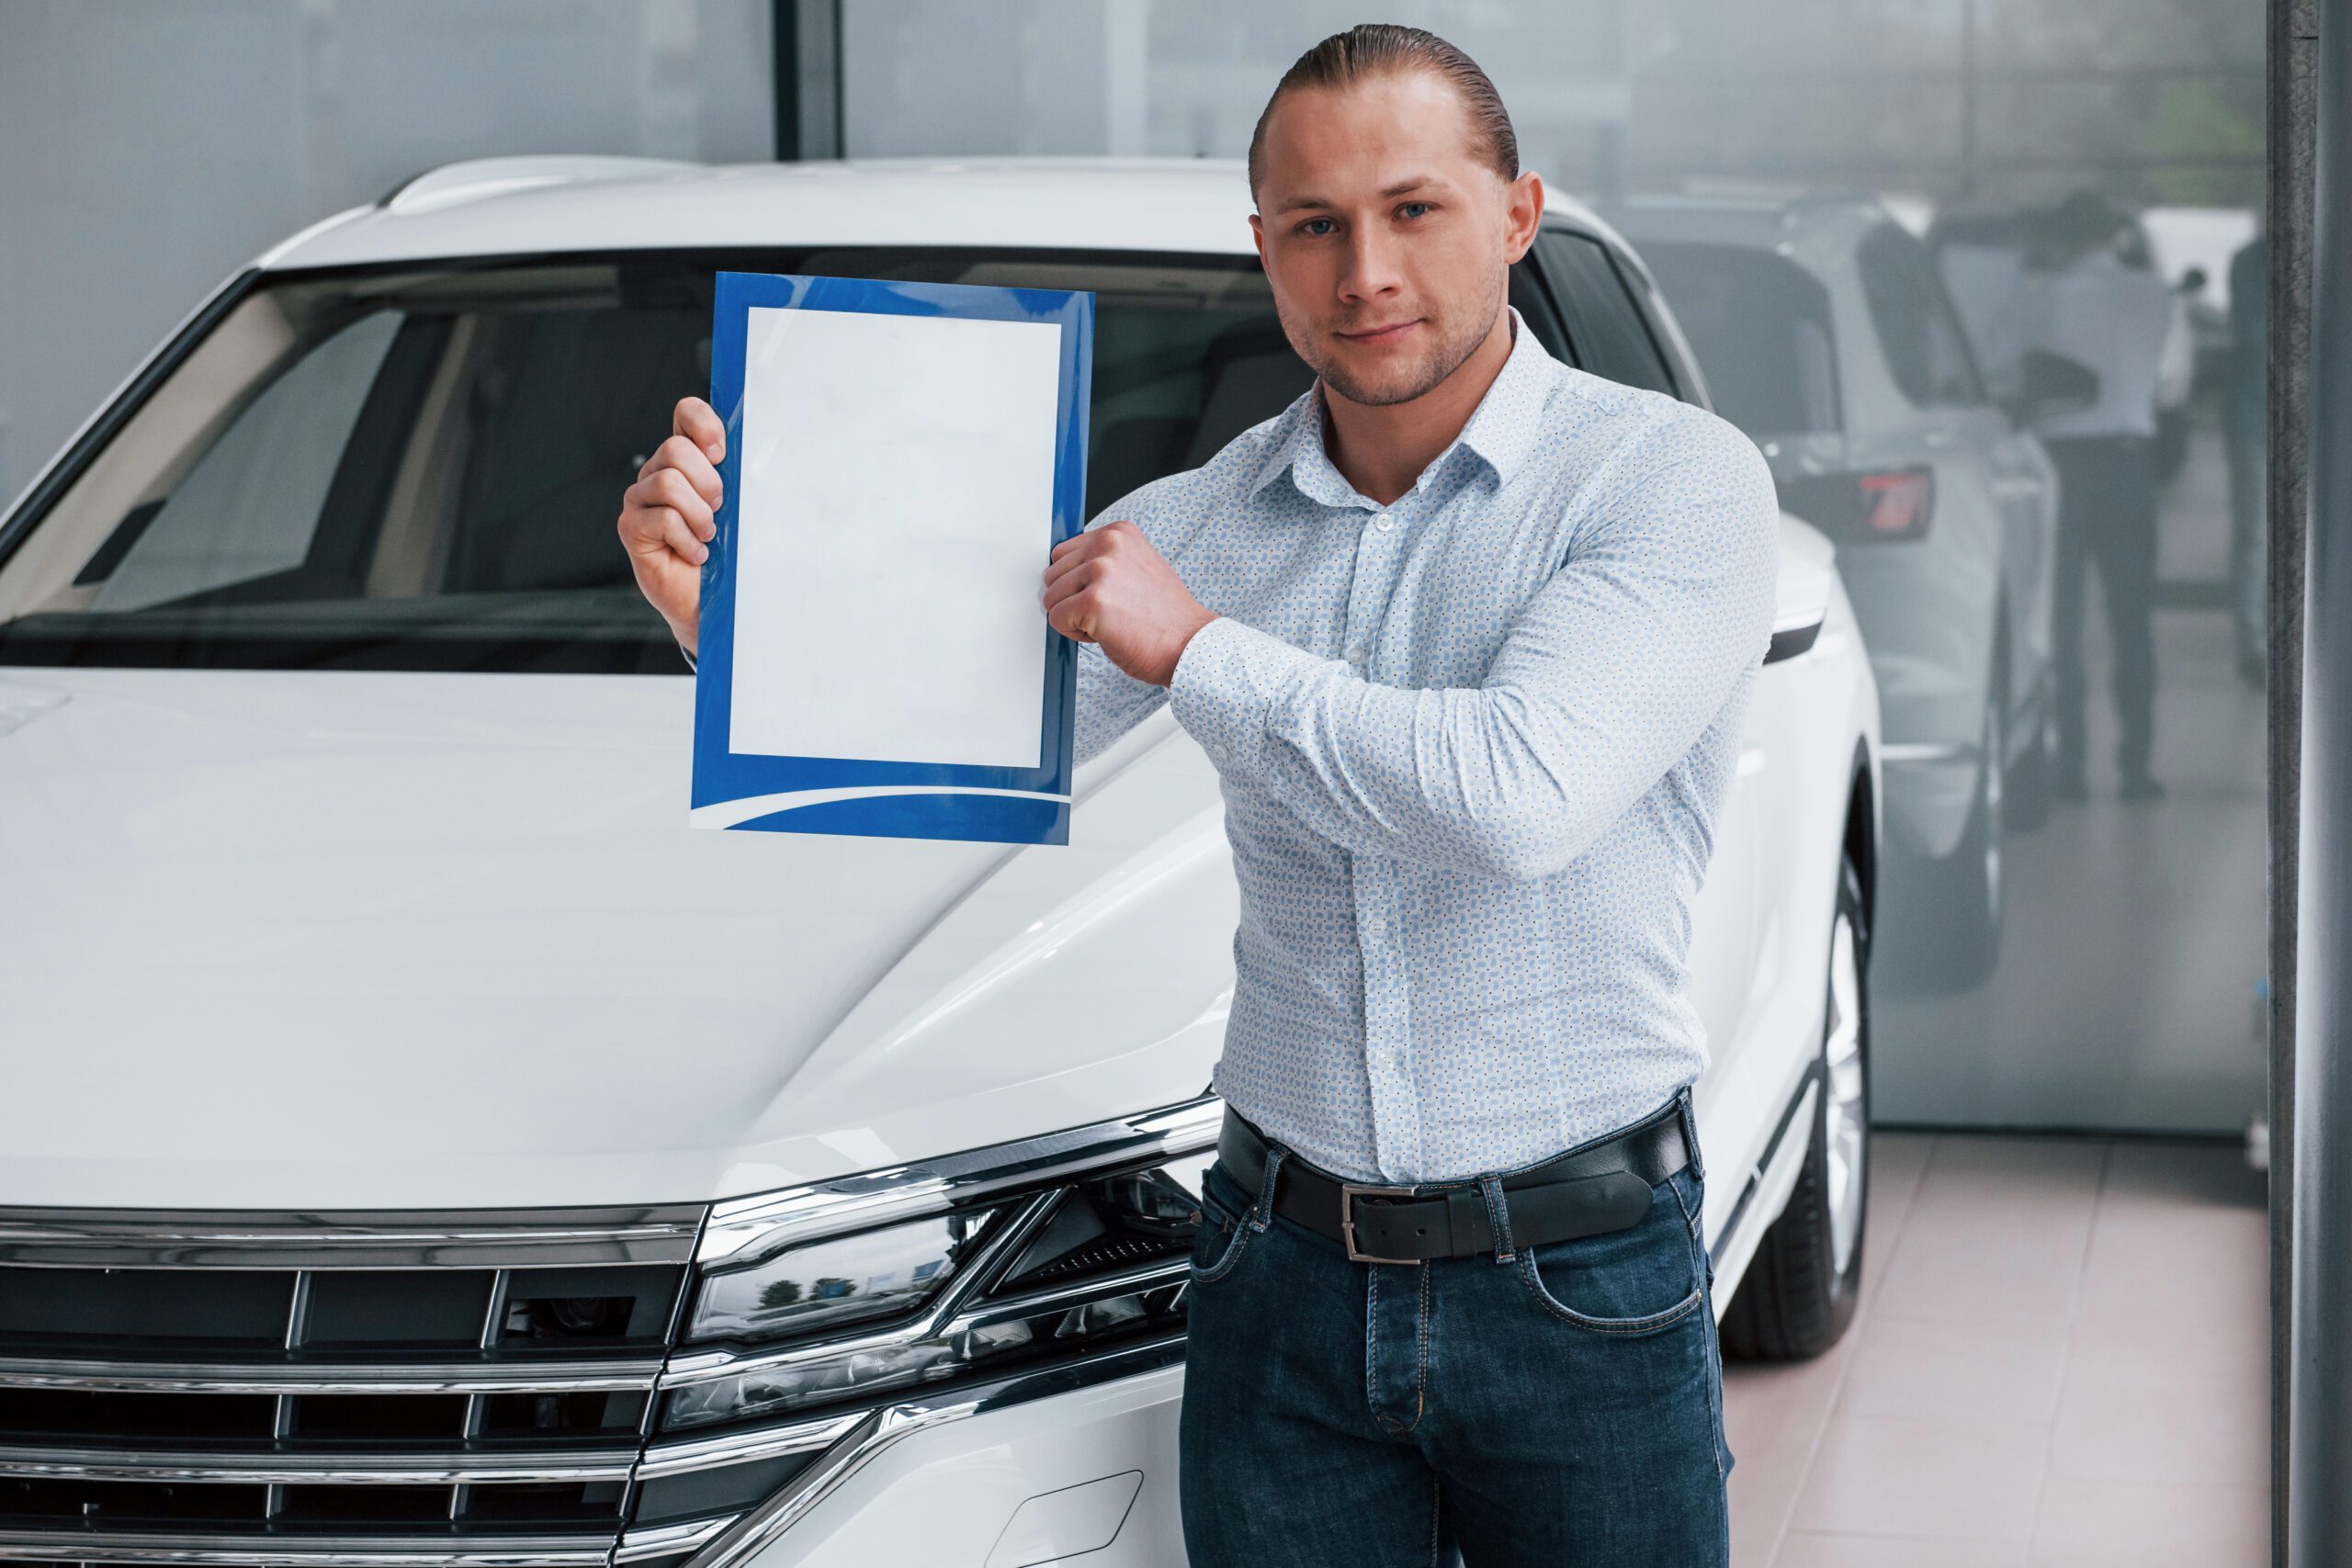 Man standing by car showing a car warranty document